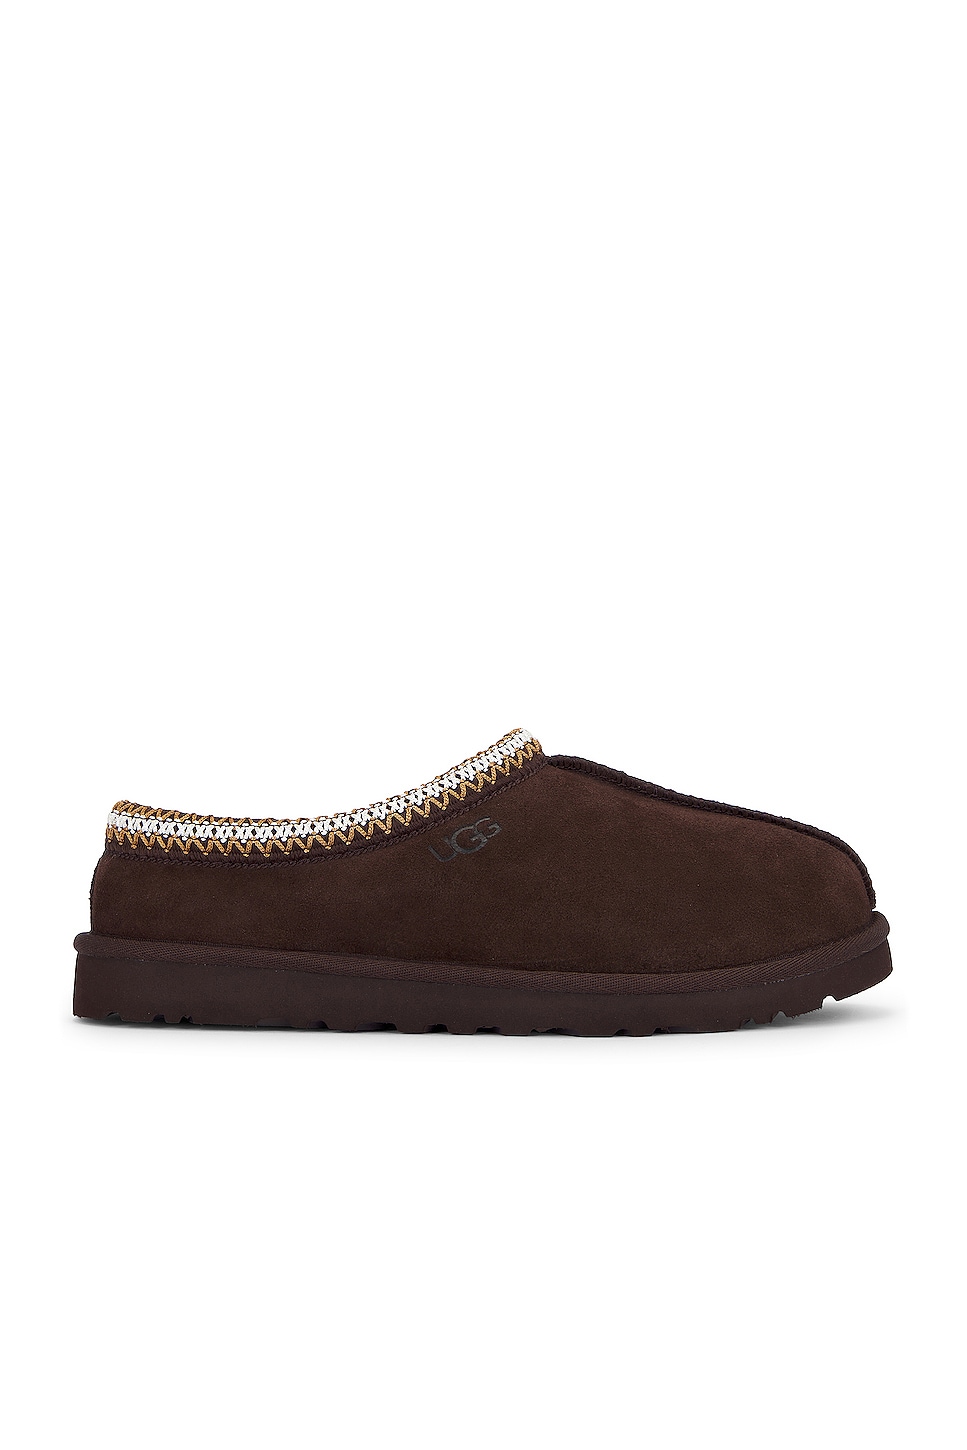 Image 1 of UGG Tasman in Dusted Cocoa